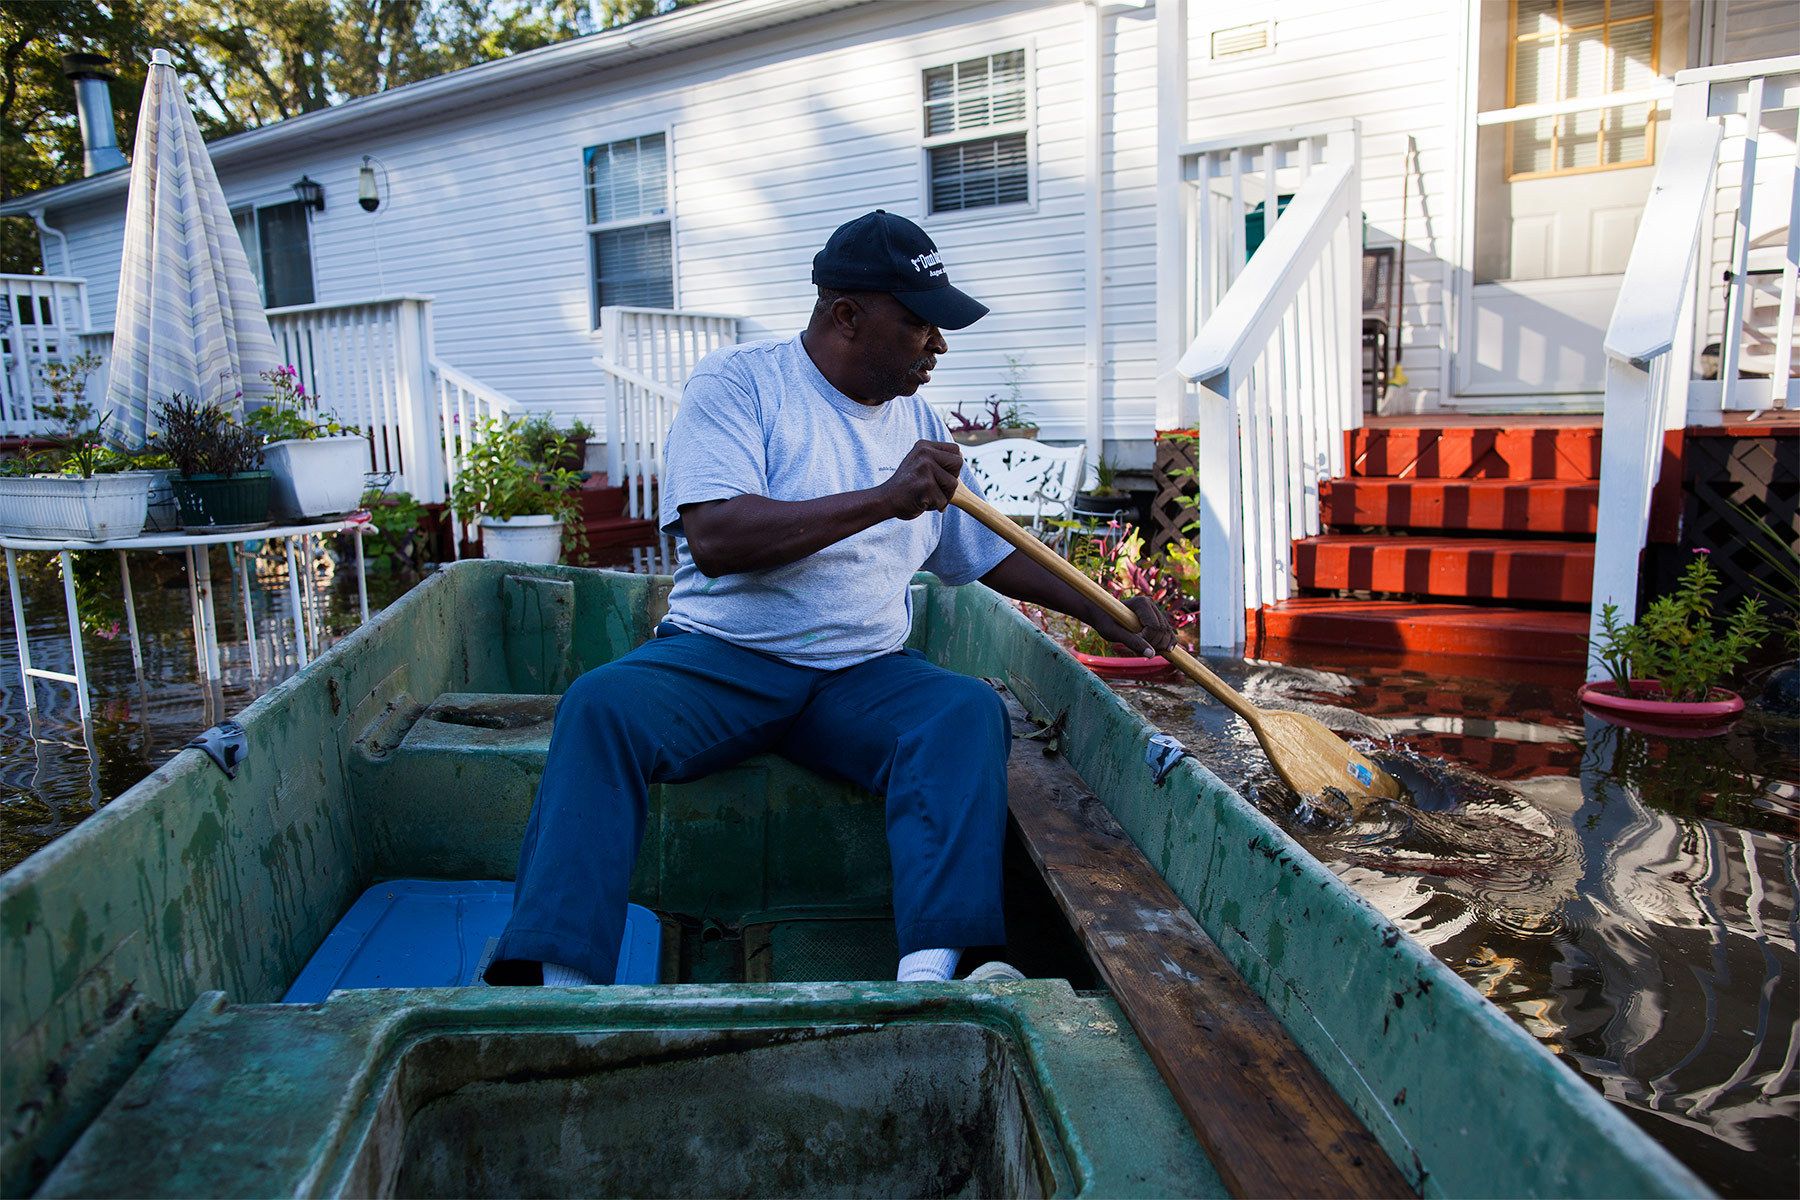 Arthur Linden uses a johnboat to survey the flooded areas of his brother's property along Dunbar Road in Georgetown, South Carolina October 8, 2015. Flooding from historic rainfall in South Carolina claimed two more lives on Wednesday, and the threat of further inundation from swollen rivers and vulnerable dams put already ravaged communities on edge.  REUTERS/Randall Hill